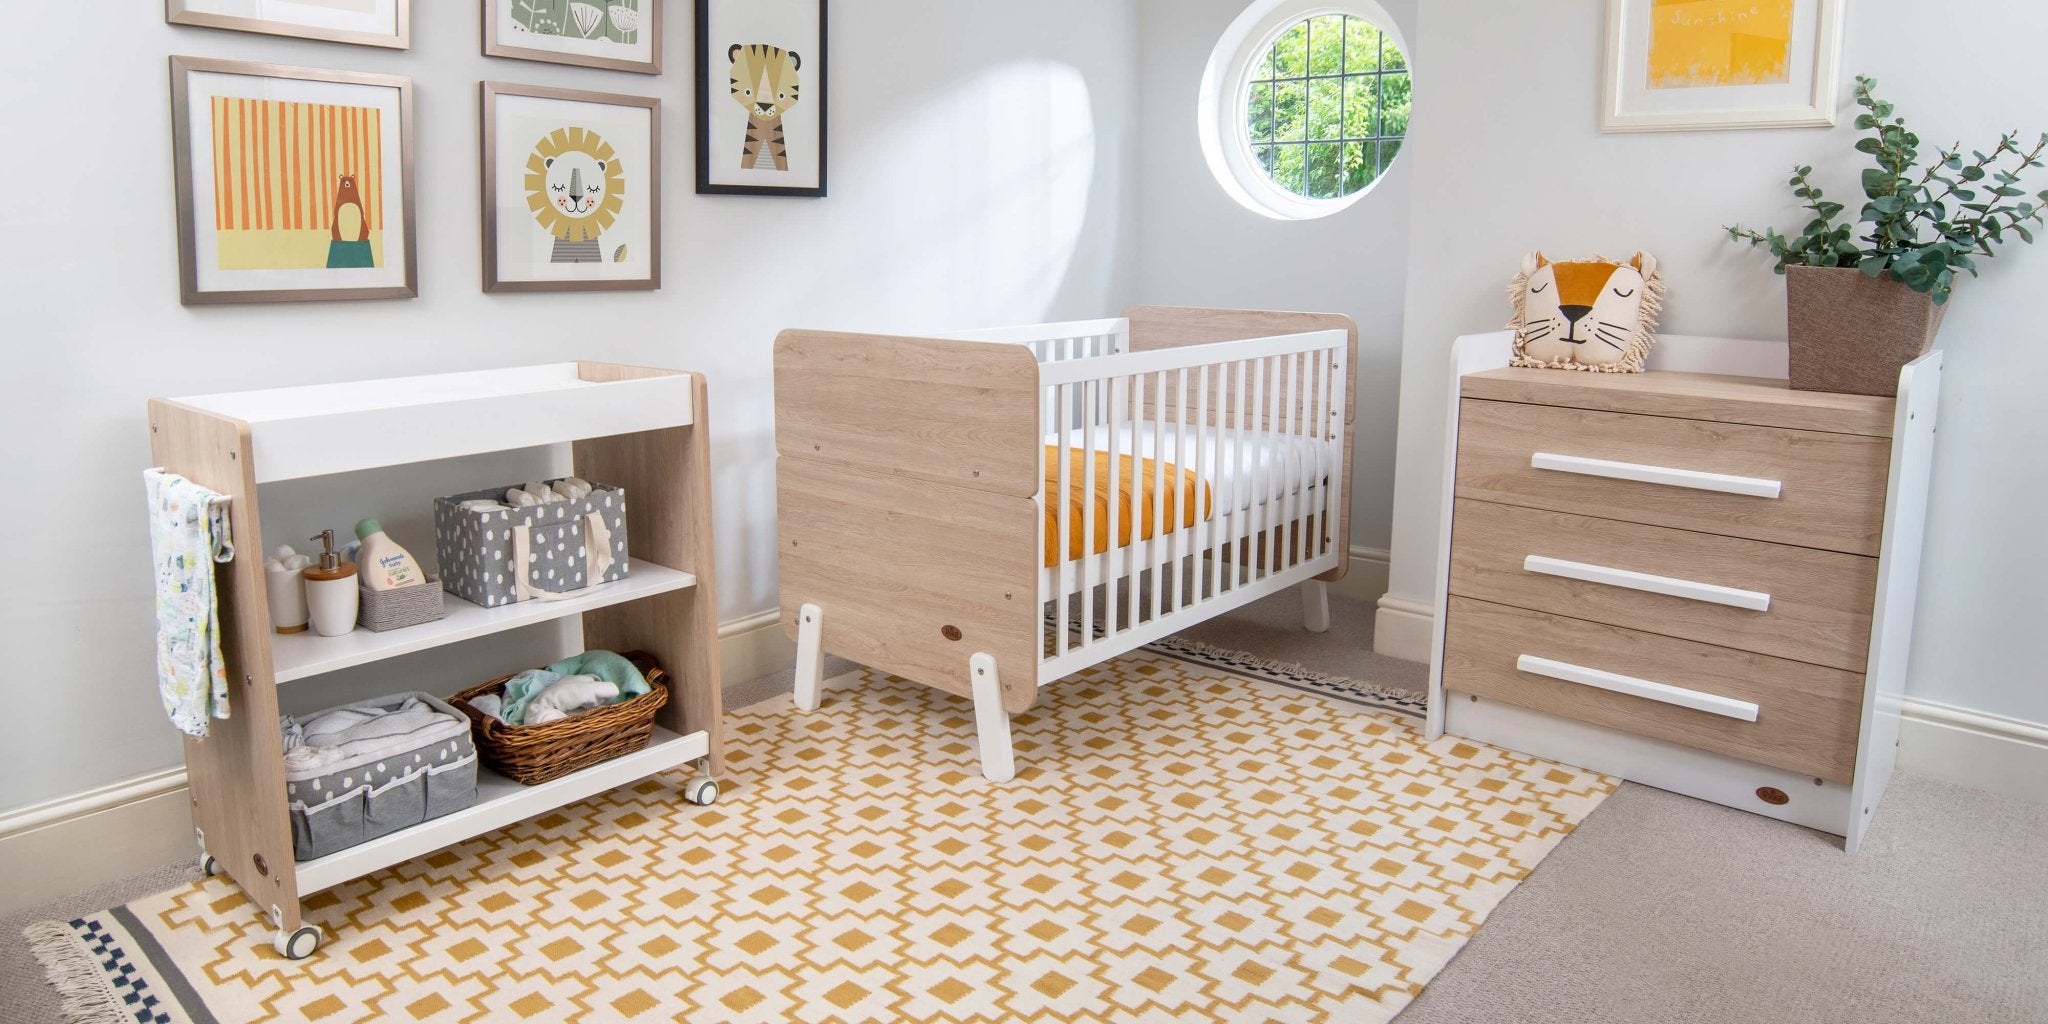 natty nursery set in bright nursery with yellow accents